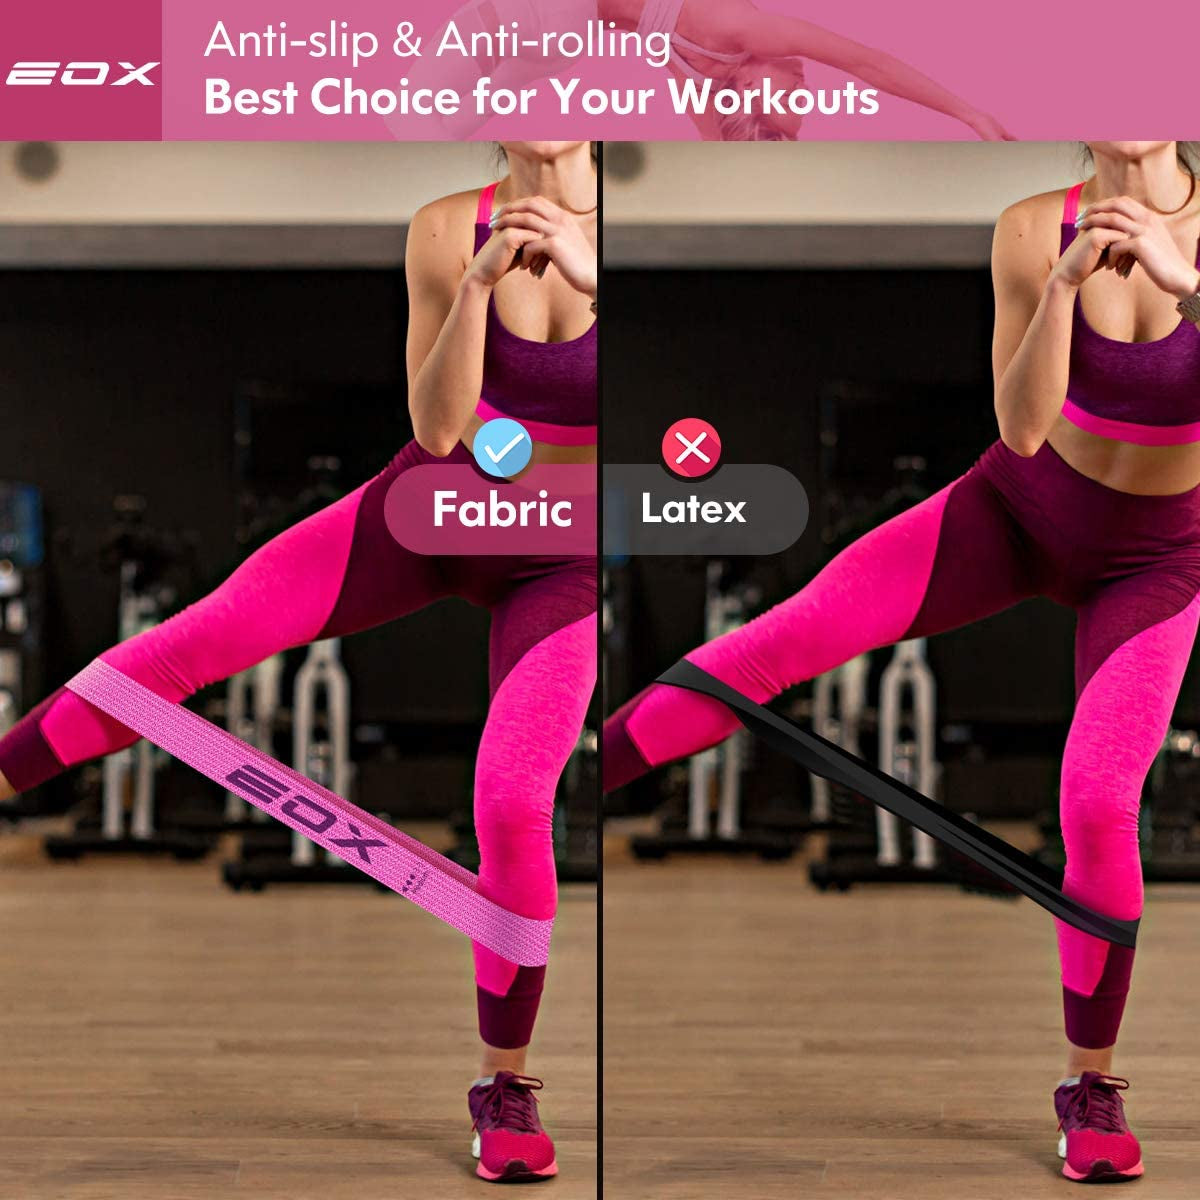 "Get Stronger and Sculpt Your Body with Non-Slip Resistance Fabric Loop Bands - Perfect for Toning Legs, Butt, and Glutes - Includes 5 Resistance Levels for Effective Hip Training"